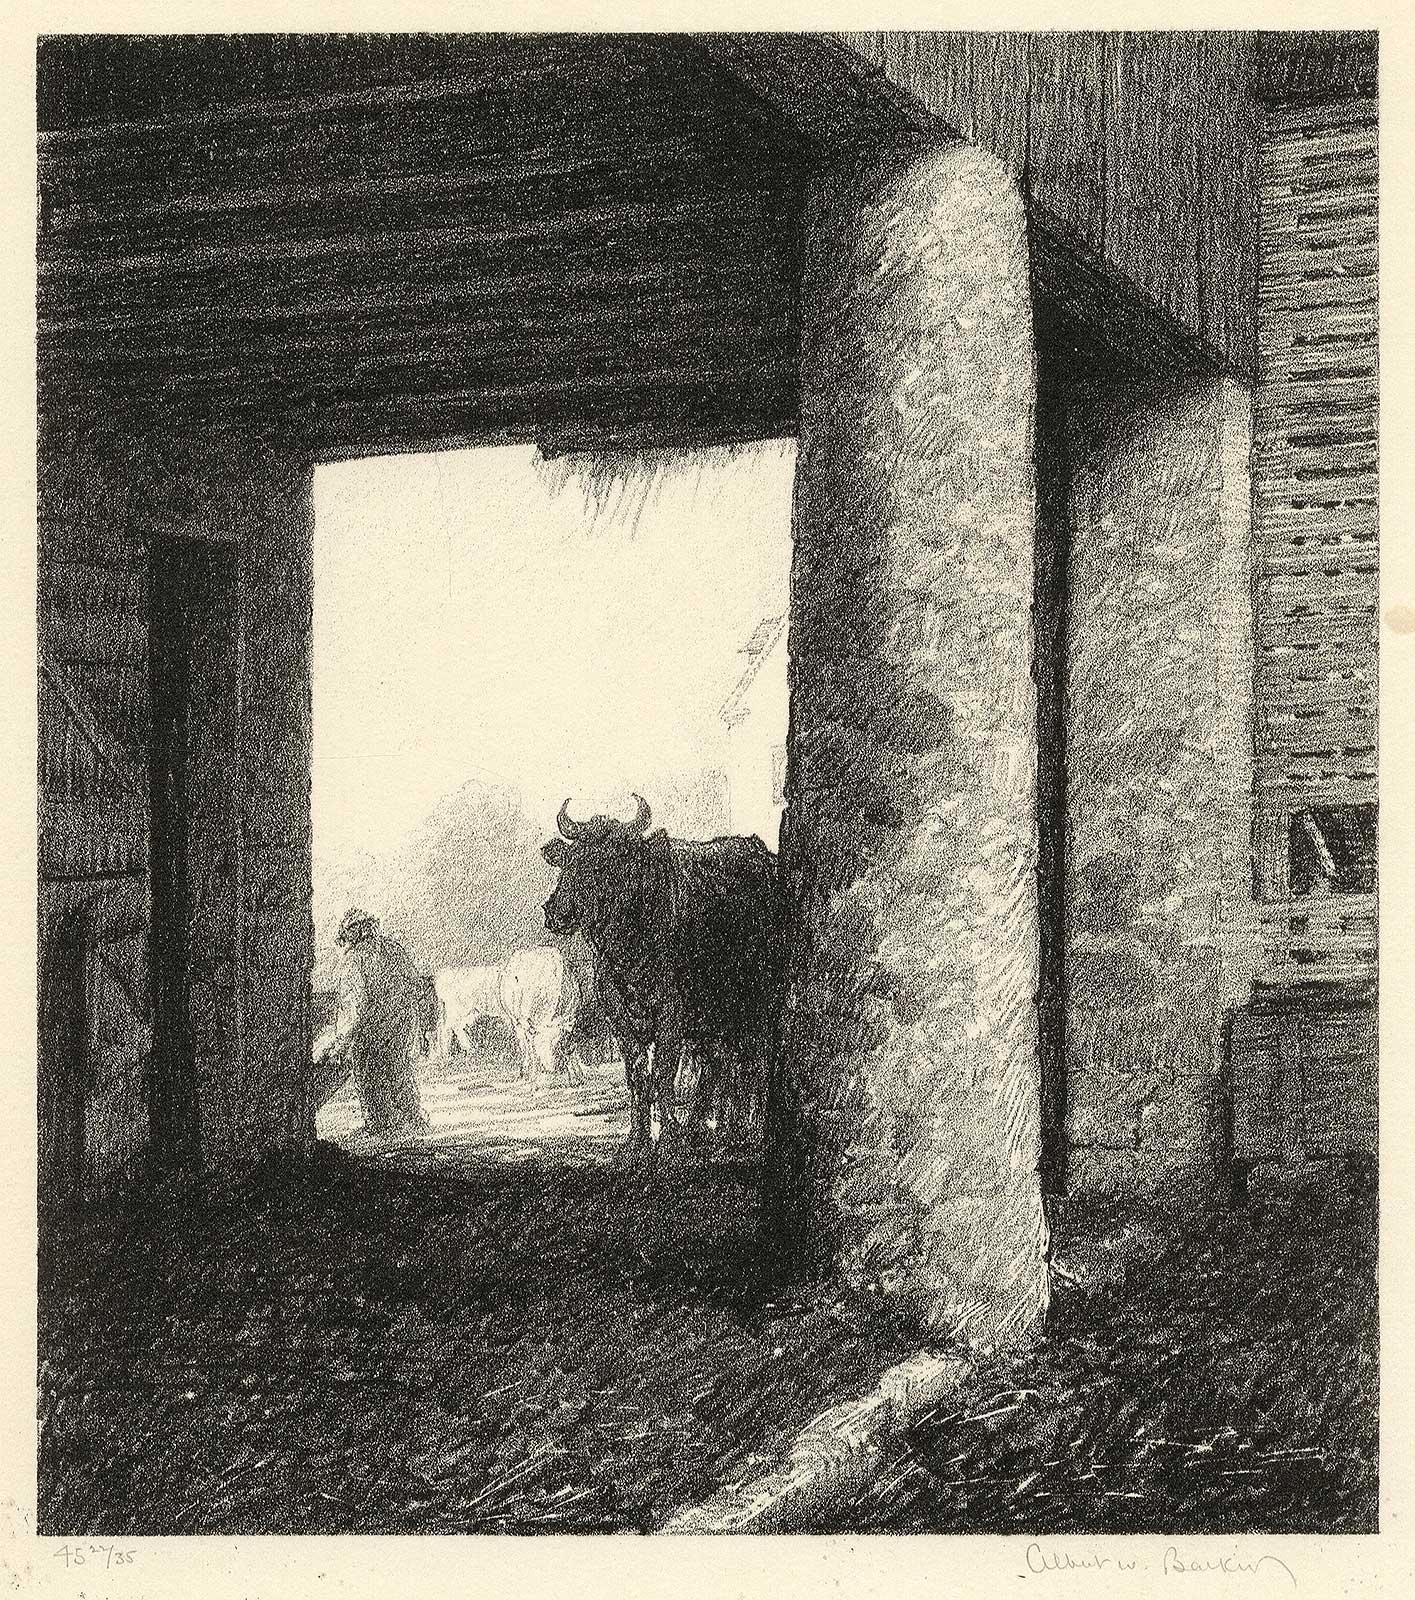 The Barn (a romantic look at the rural landscape of an earlier American era) - Black Figurative Print by Albert Winslow Barker